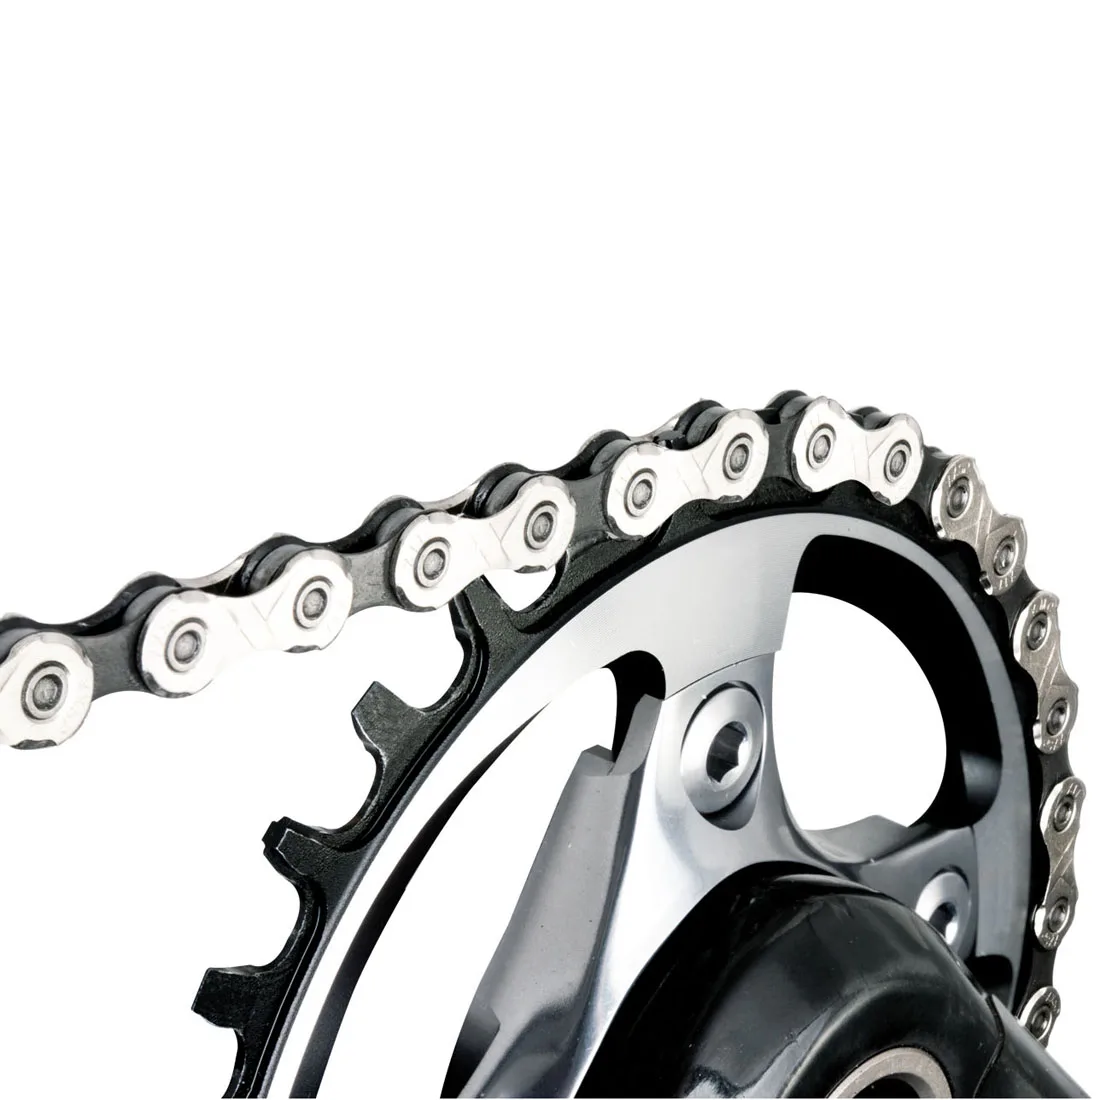 

KMC Chain Bicycle Road Bike/Mountain Bike Chain 9/10/11 Speed Magic Button 116L/118L Compatible for SHIMANO 9/10/11 Speed